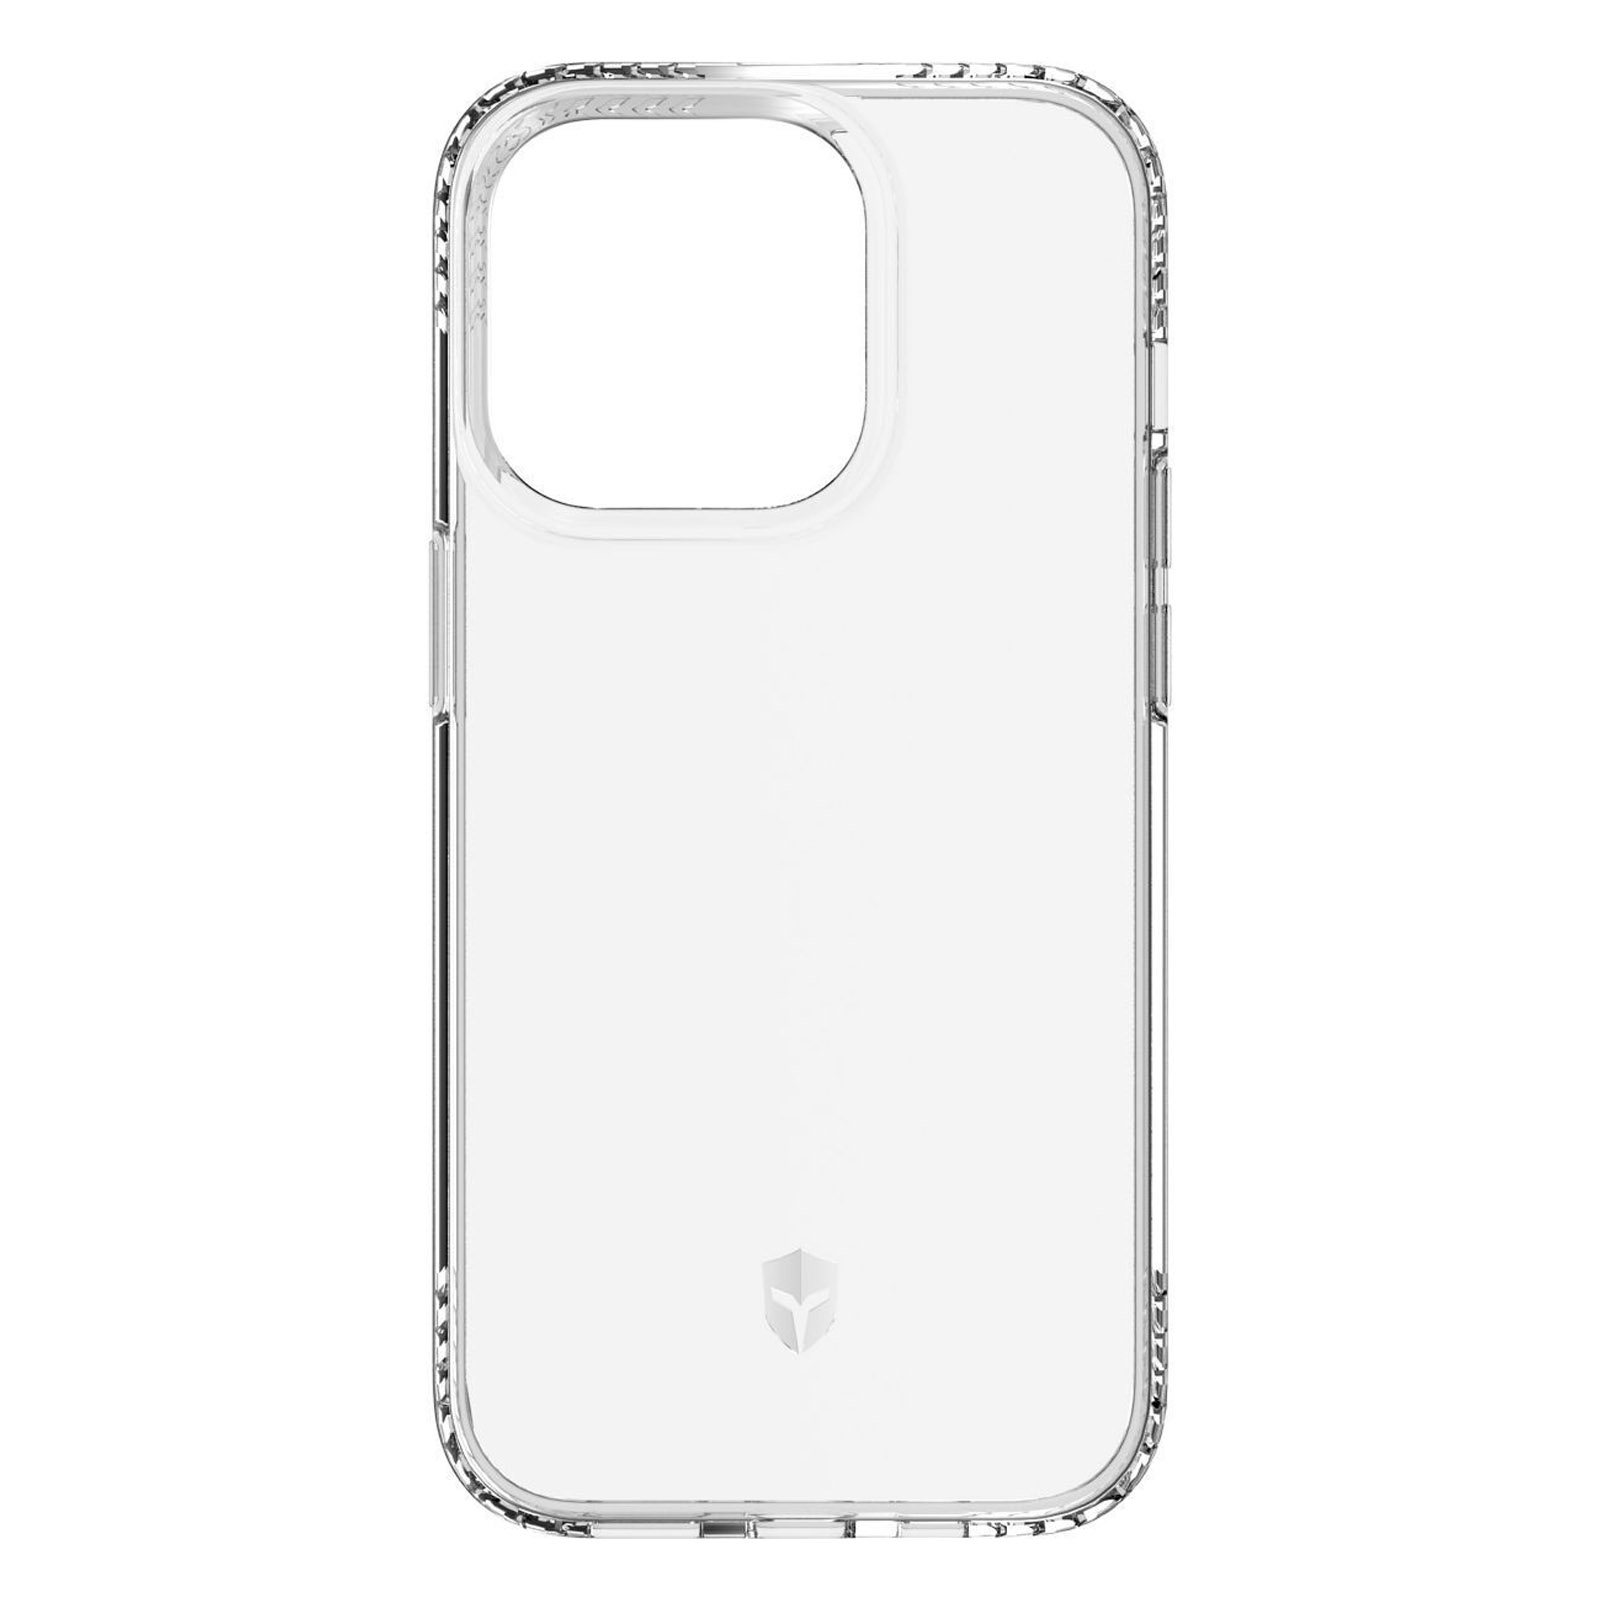 14 Pulse Pro CASE FORCE Apple, iPhone Backcover, Max, Transparent Series, Handyhülle